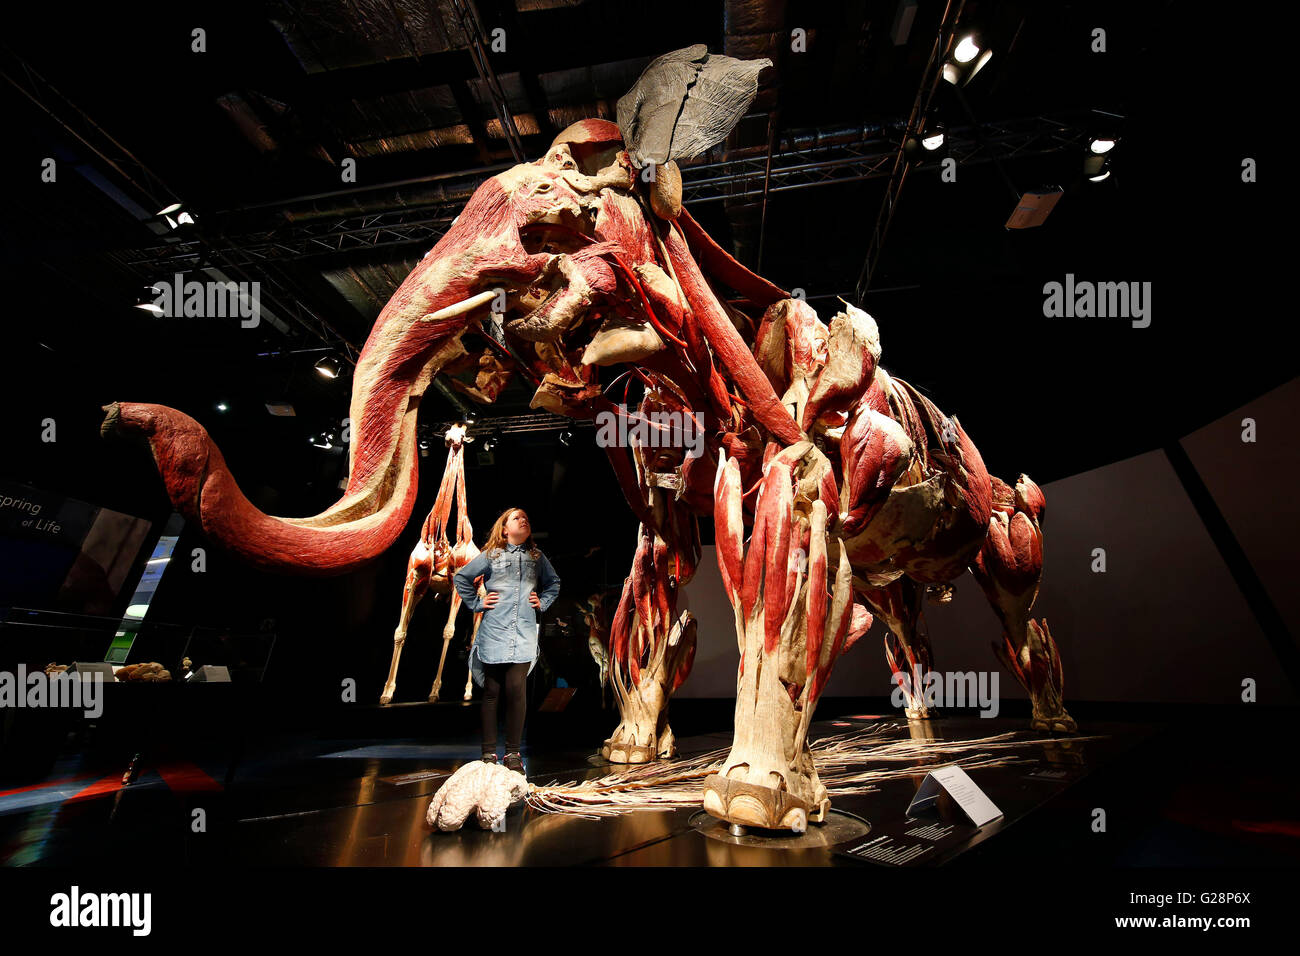 Hannah Mclintosh, eight, looks at an exhibit from the Body Worlds, Animal Inside Out exhibition at the International Centre for Life science village in Newcastle upon Tyne. Stock Photo